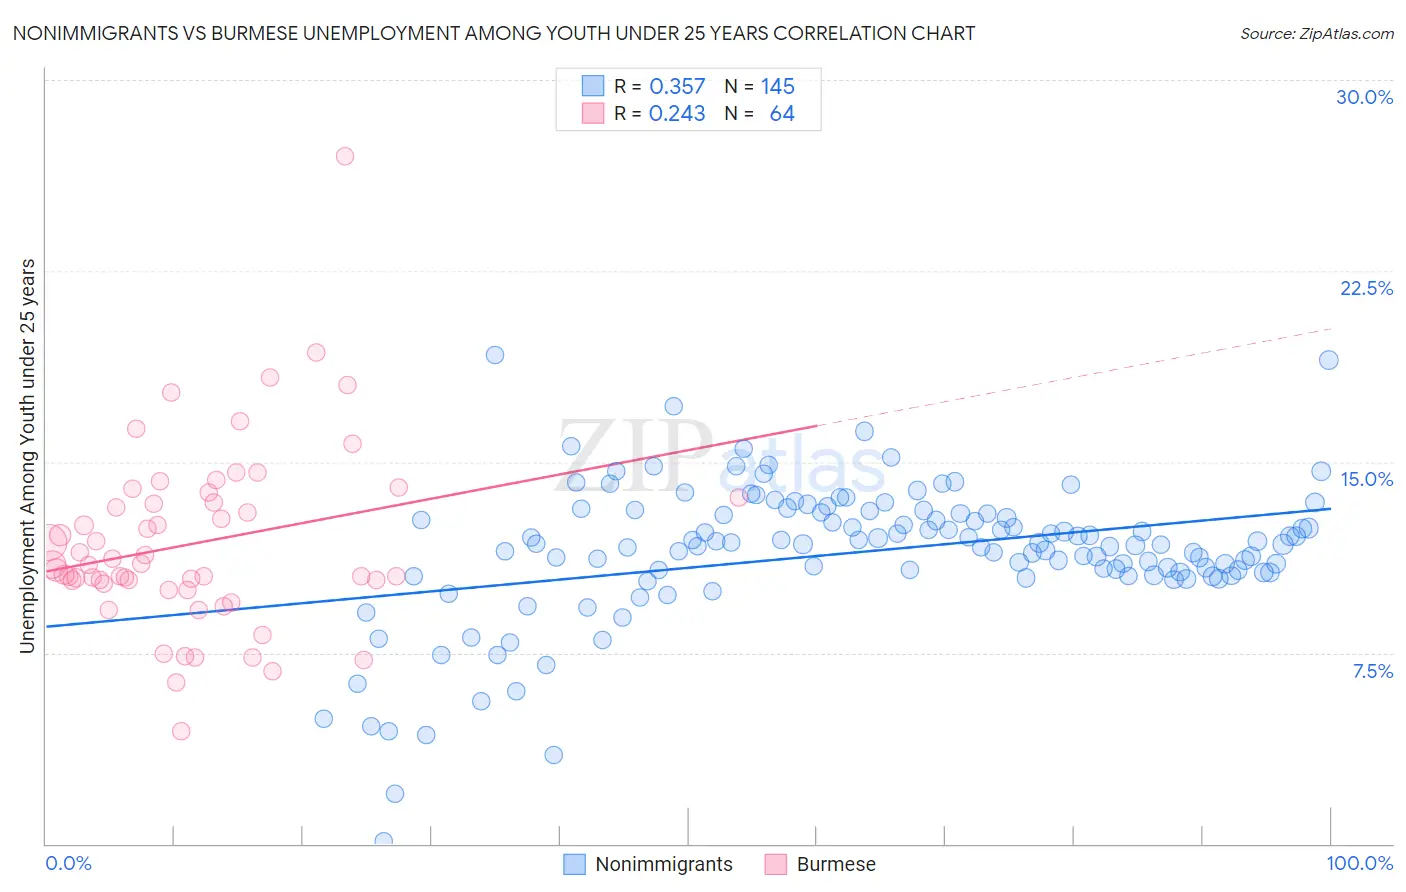 Nonimmigrants vs Burmese Unemployment Among Youth under 25 years